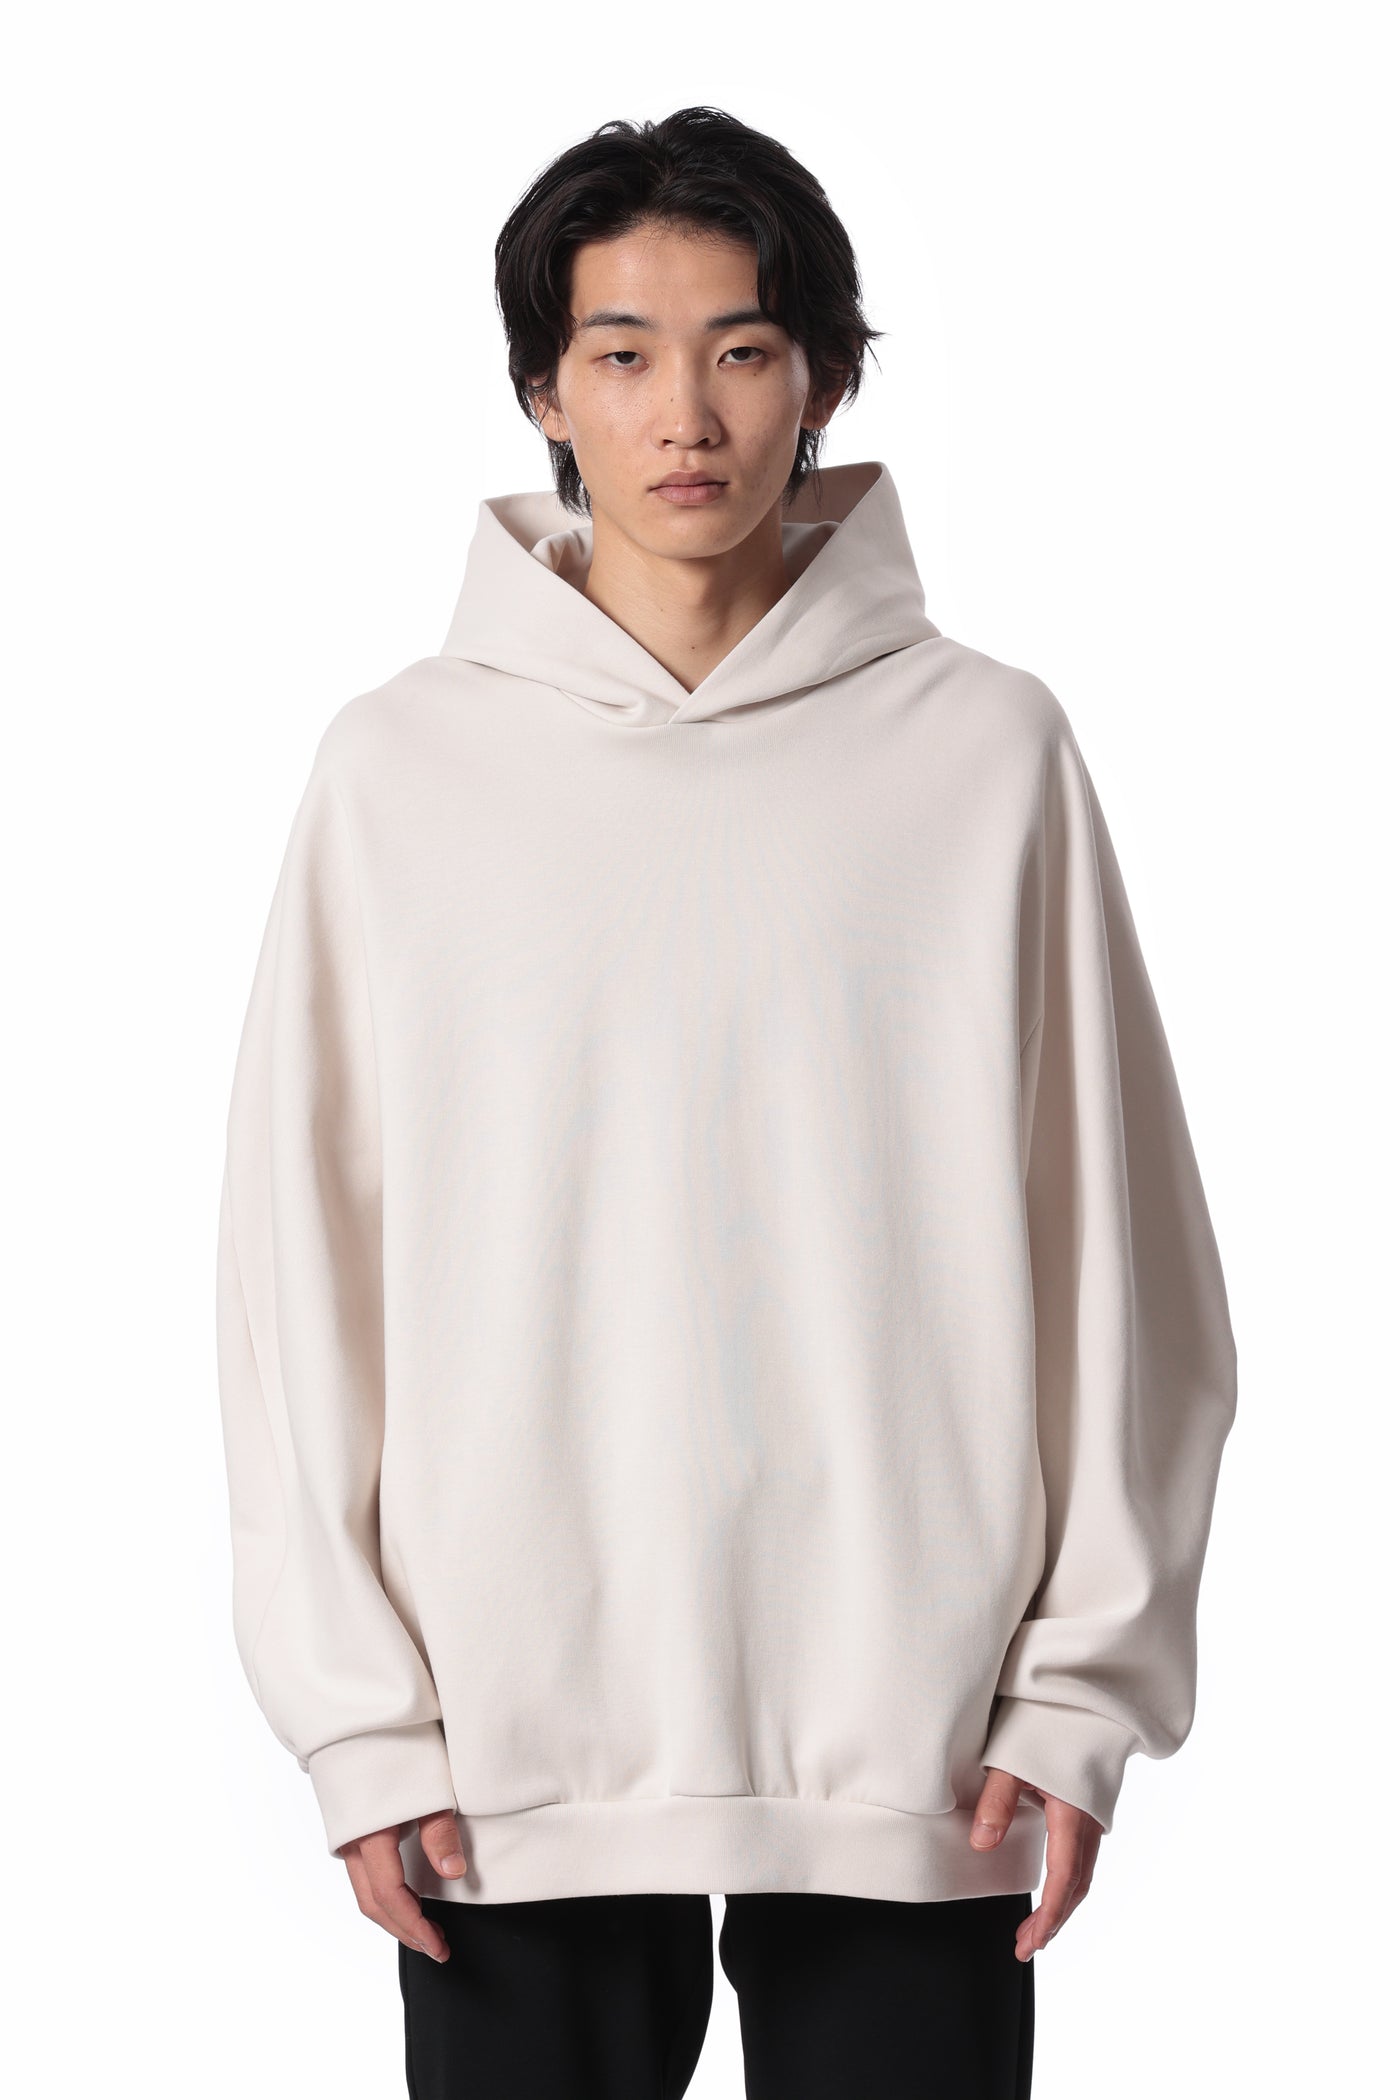 Released in February AJ41-023 Cotton/Polyester Double Knit Hoodie